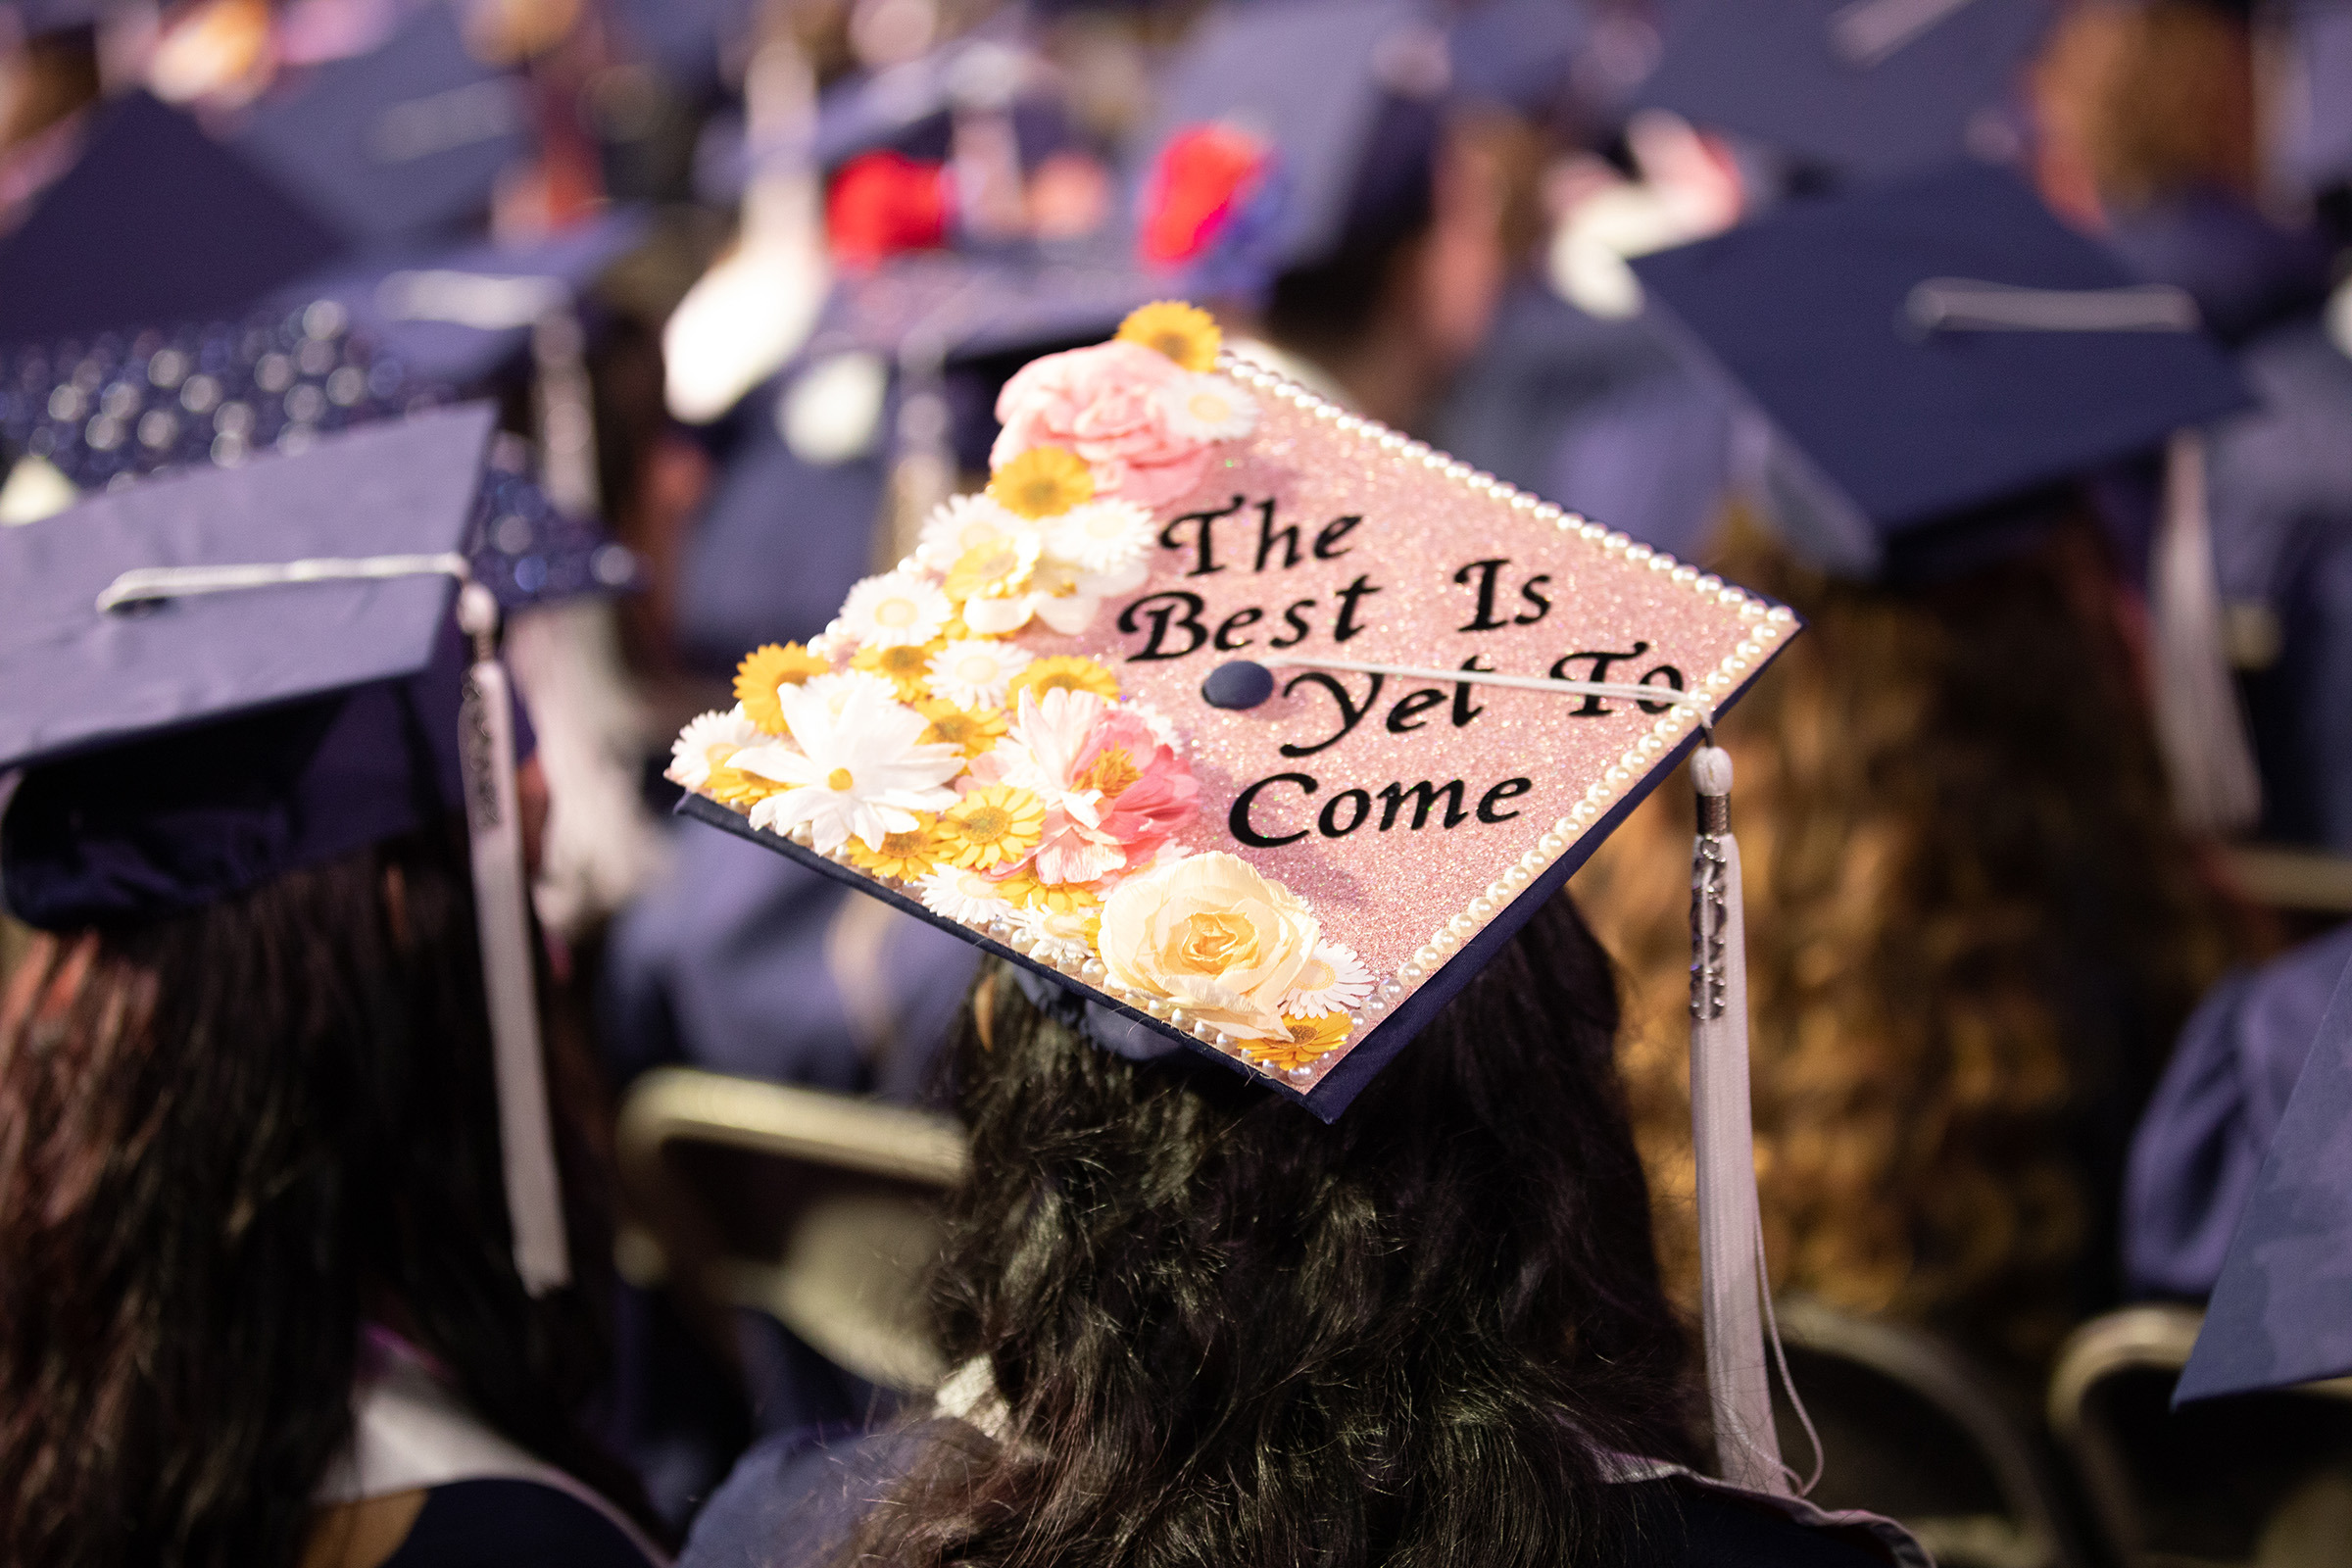 graduation cap with the words "the best is yet to come"